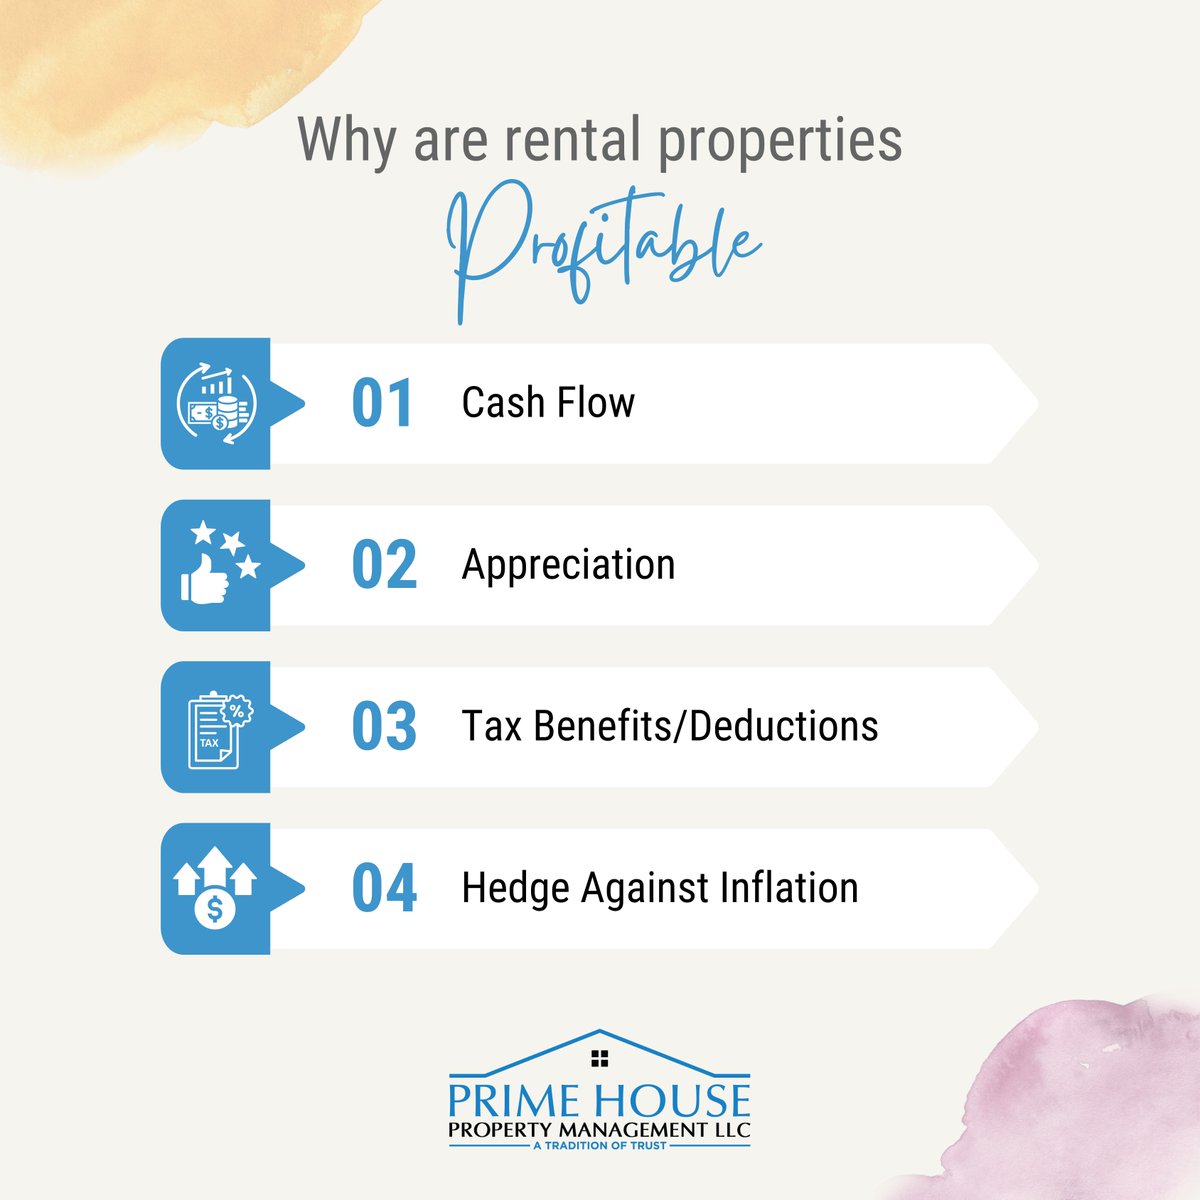 Rental properties can be profitable because they have the potential to generate passive income through monthly rent payments, appreciate in value over time, offer tax benefits.
----
🌐 primehouseproperties.com
.
#PropertyManagement #RealEstateManagement #PropertyPortfolio